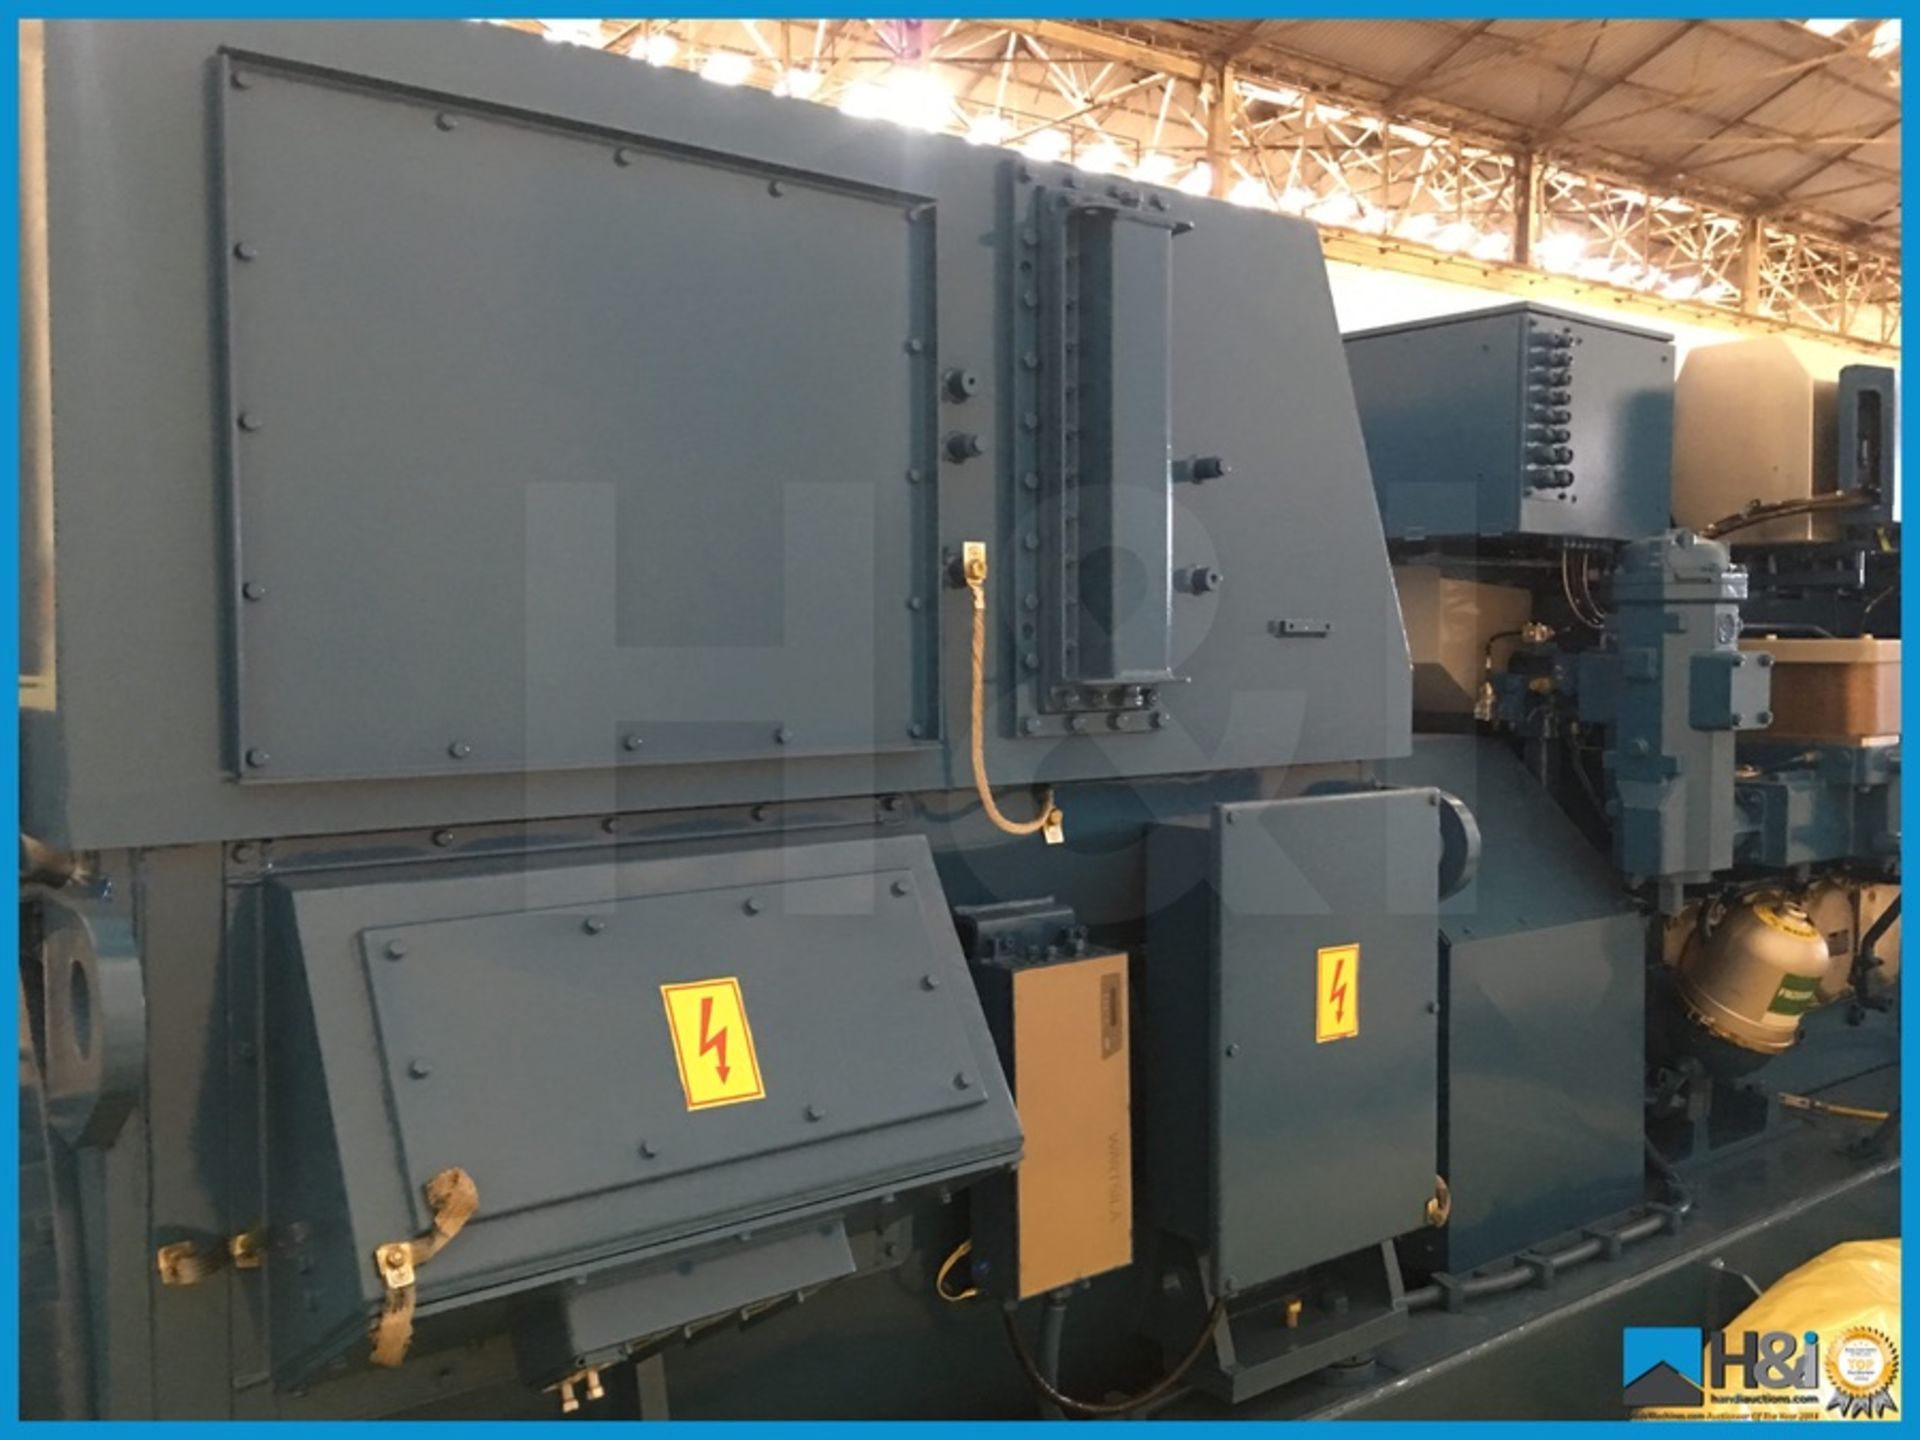 Unused Wartsila 6L20 high capacity diesel generator manufactured in 2013 for a large marine - Image 9 of 22